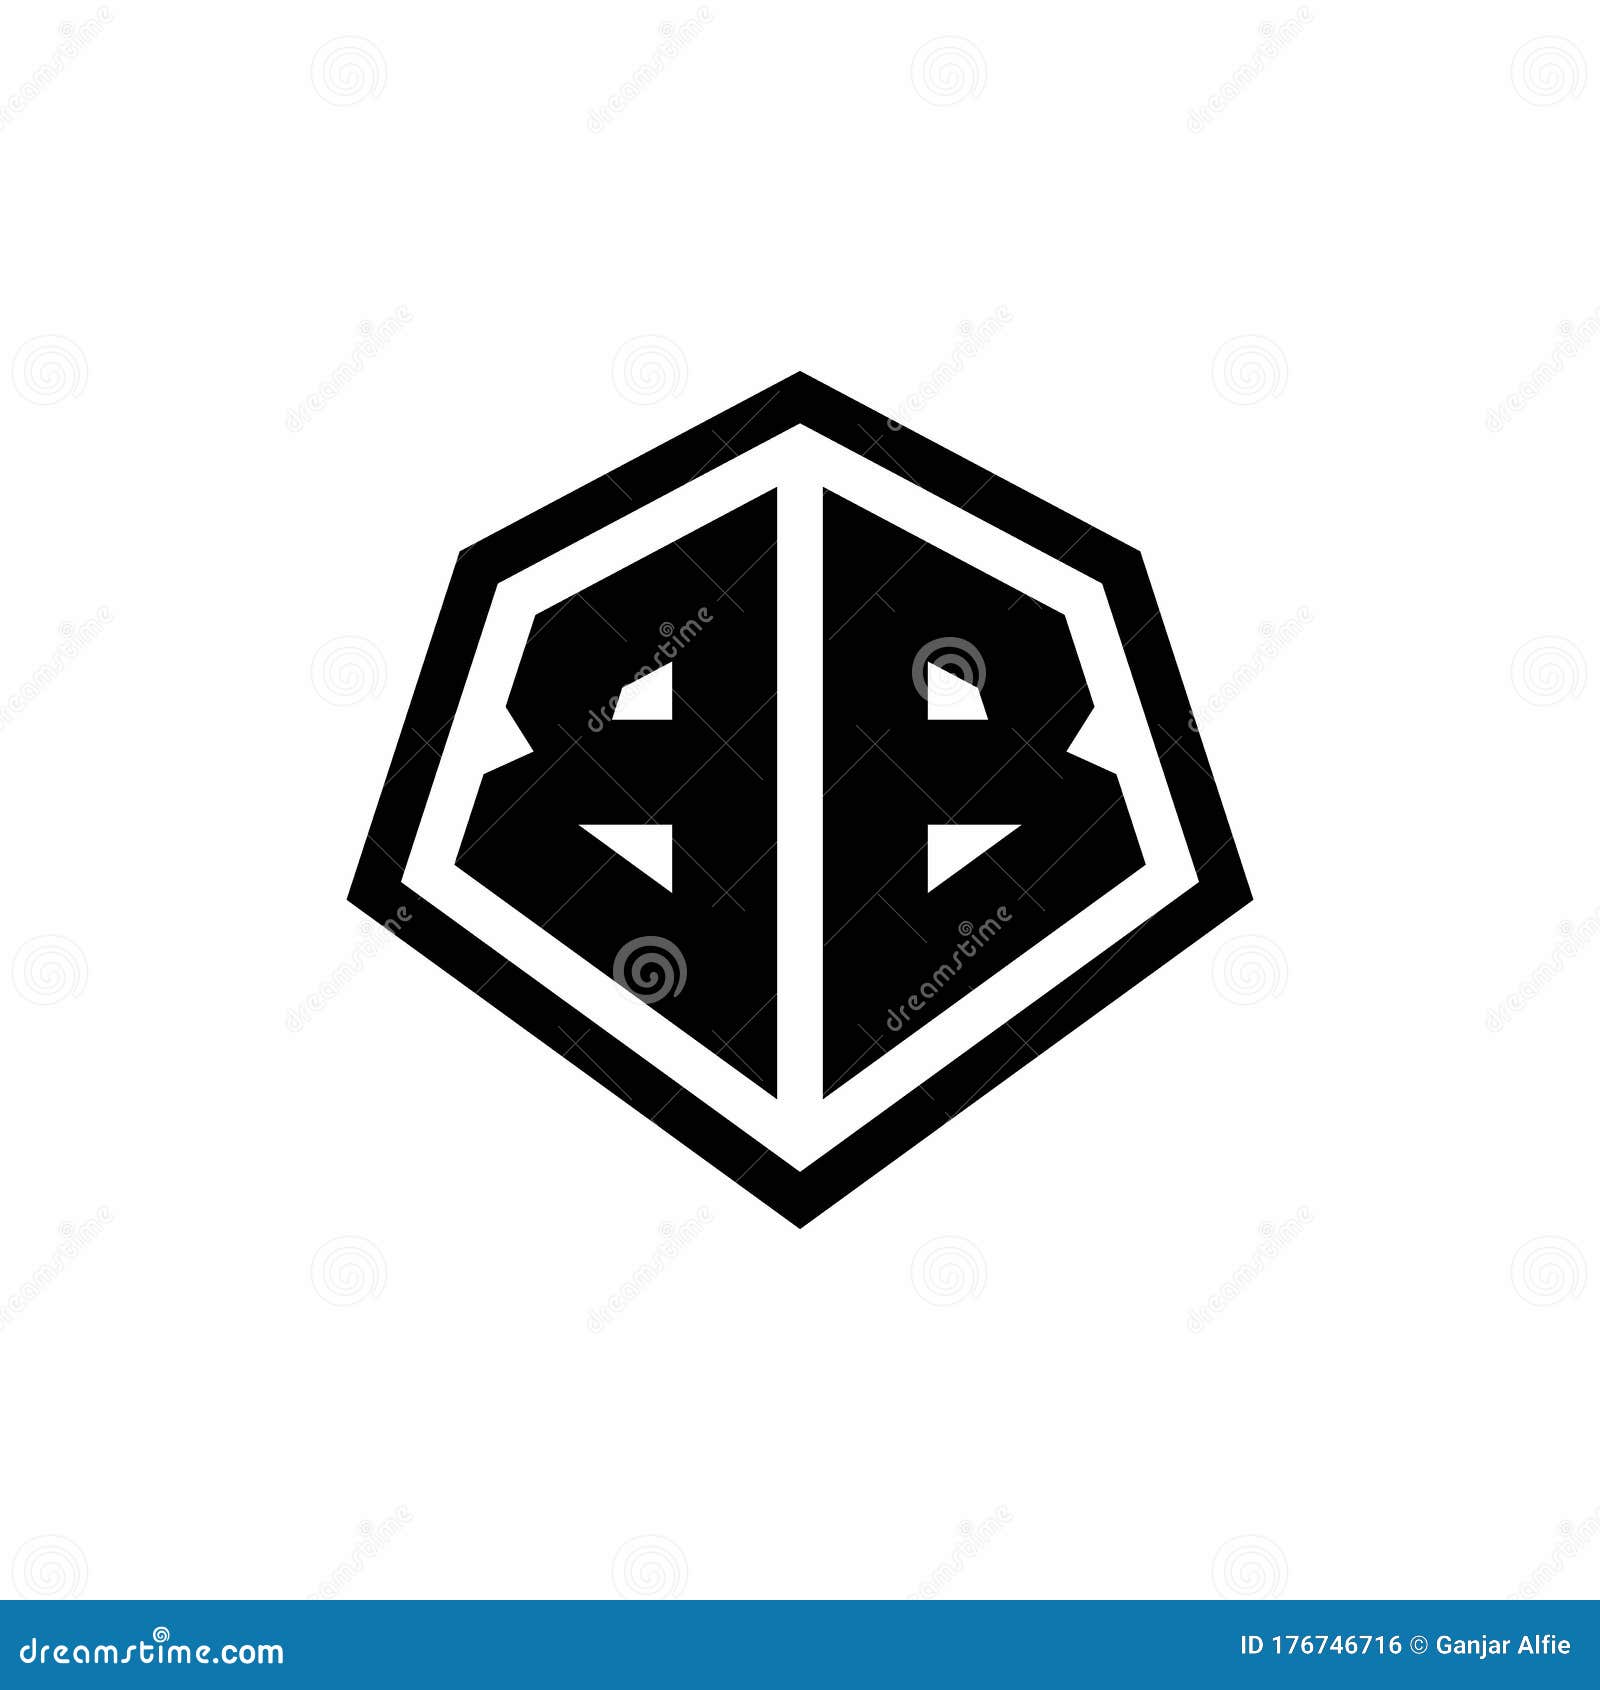 Bb monogram logo with hexagon shape and line Vector Image